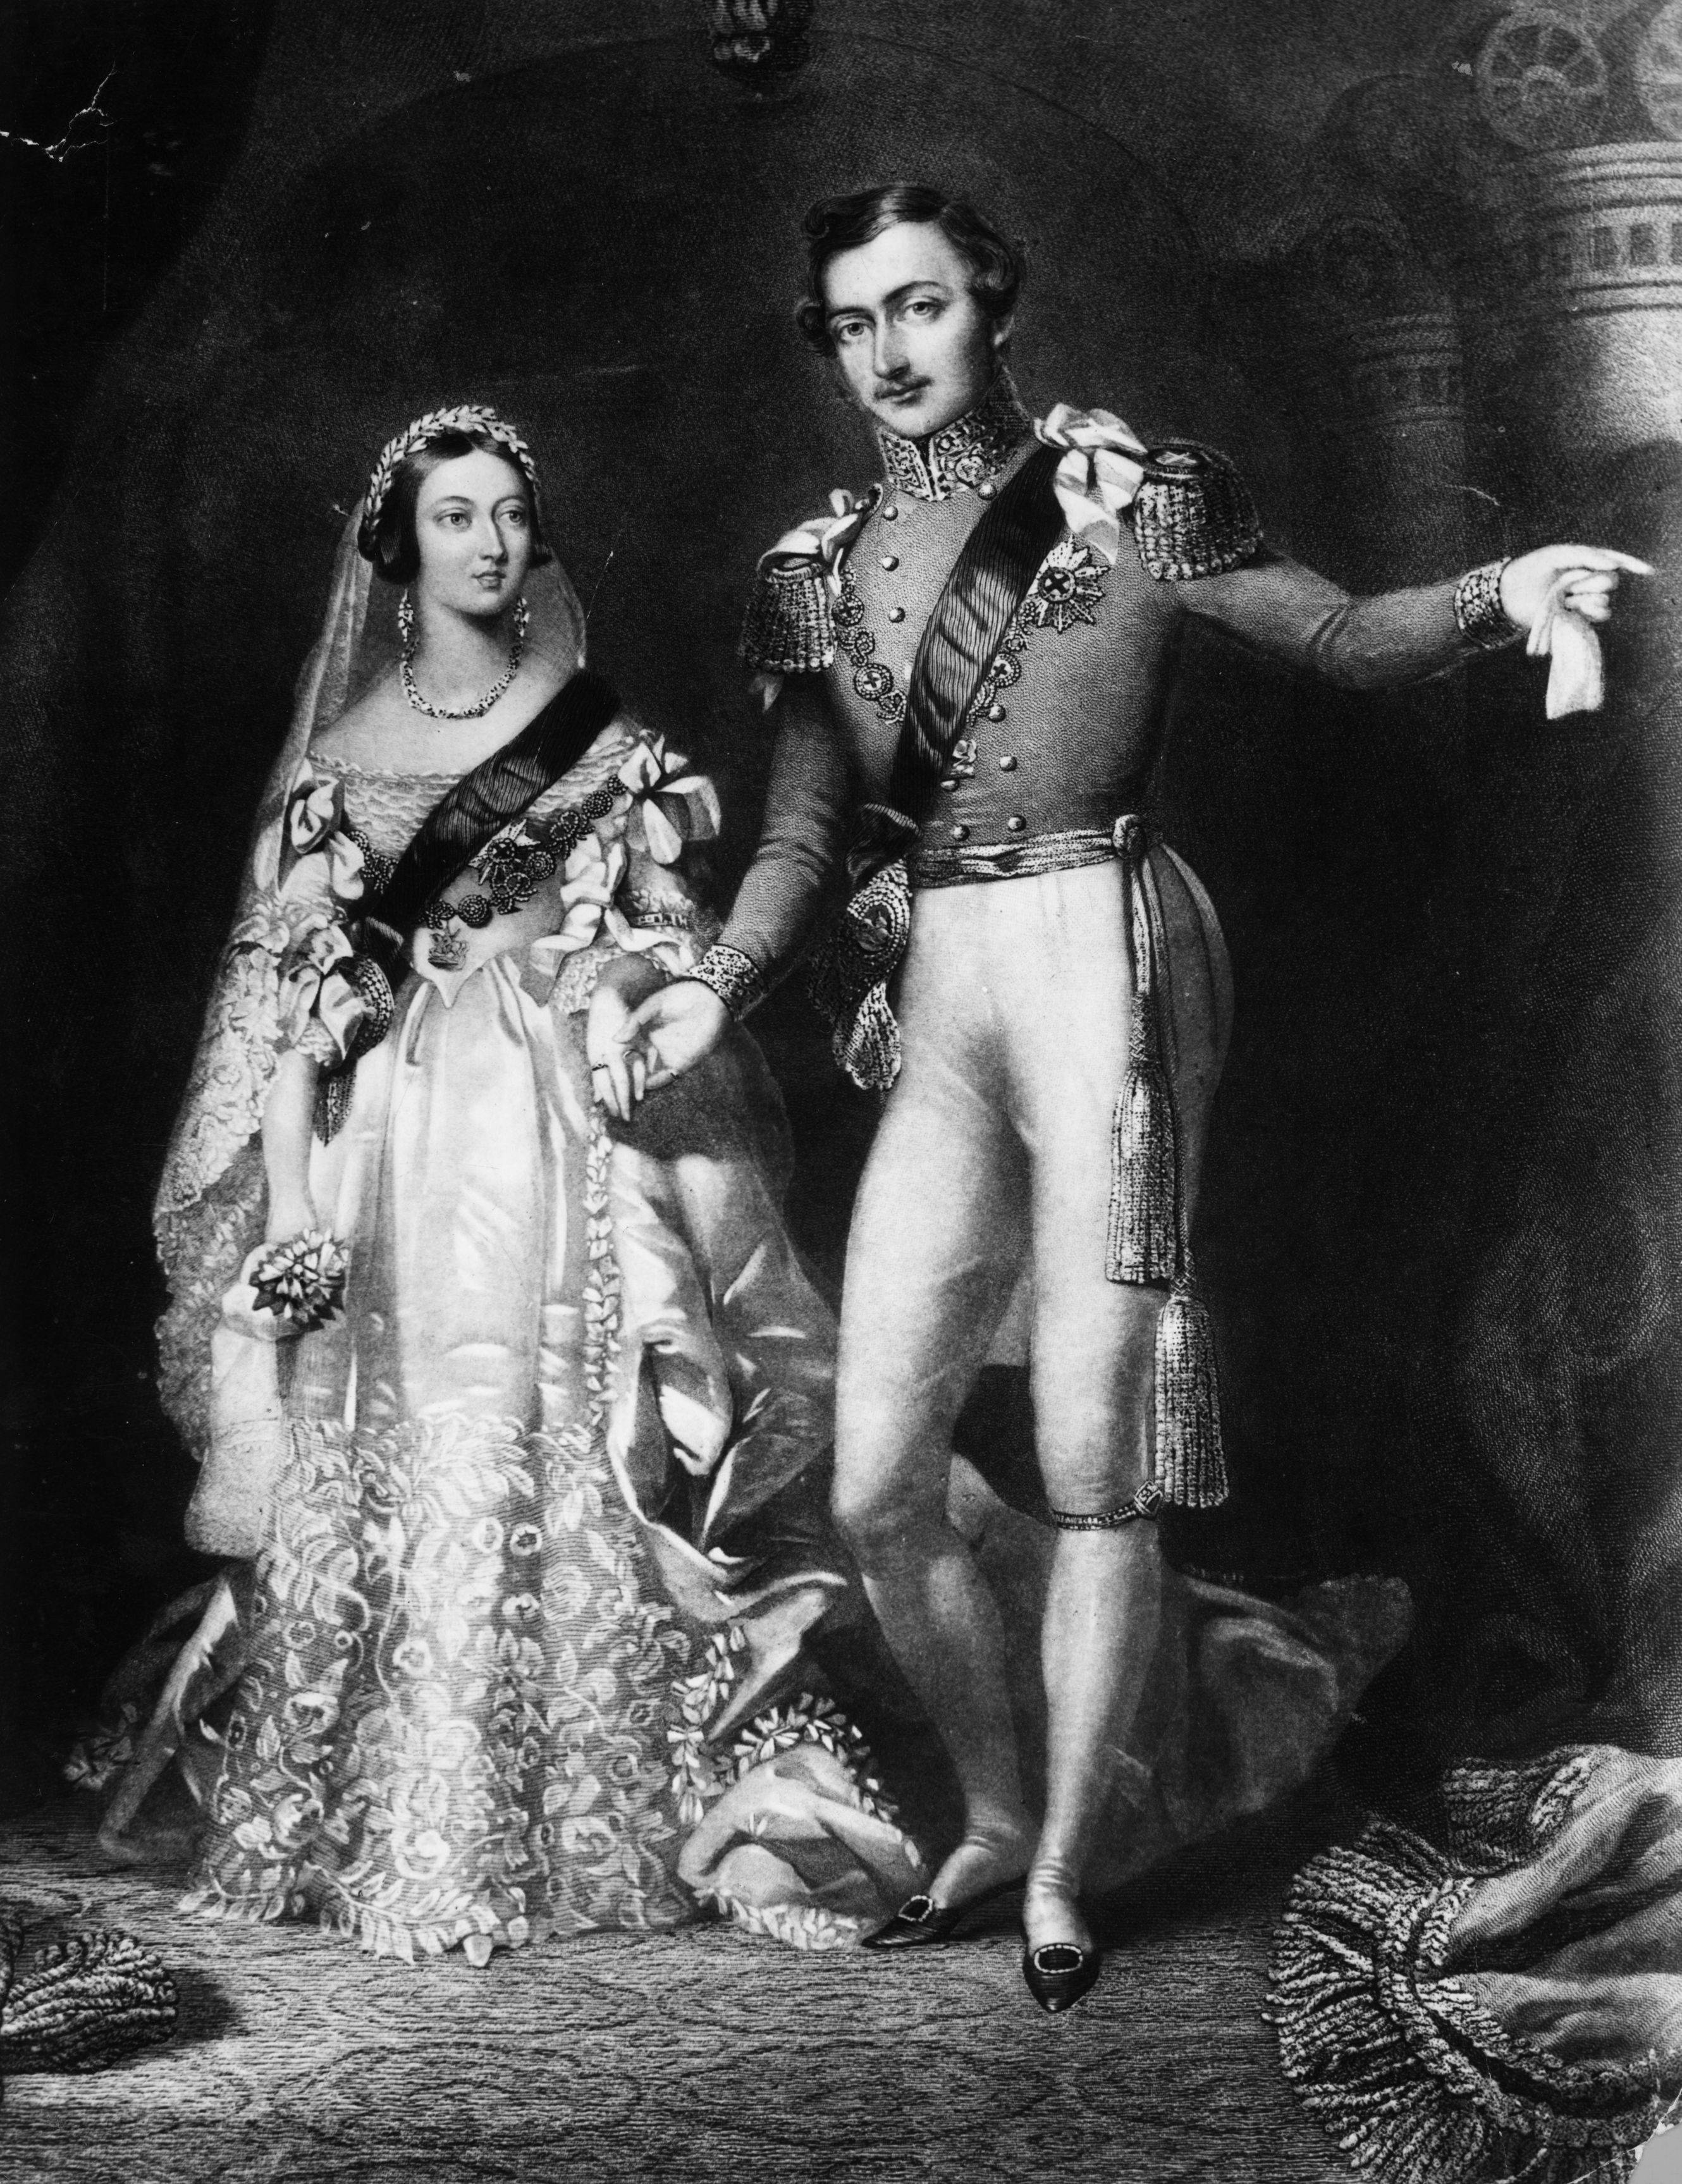 Queen Victoria and Prince Albert on their return from the marriage service at St James's Palace, London, February 10, 1840. Engraved by S Reynolds after F Lock.